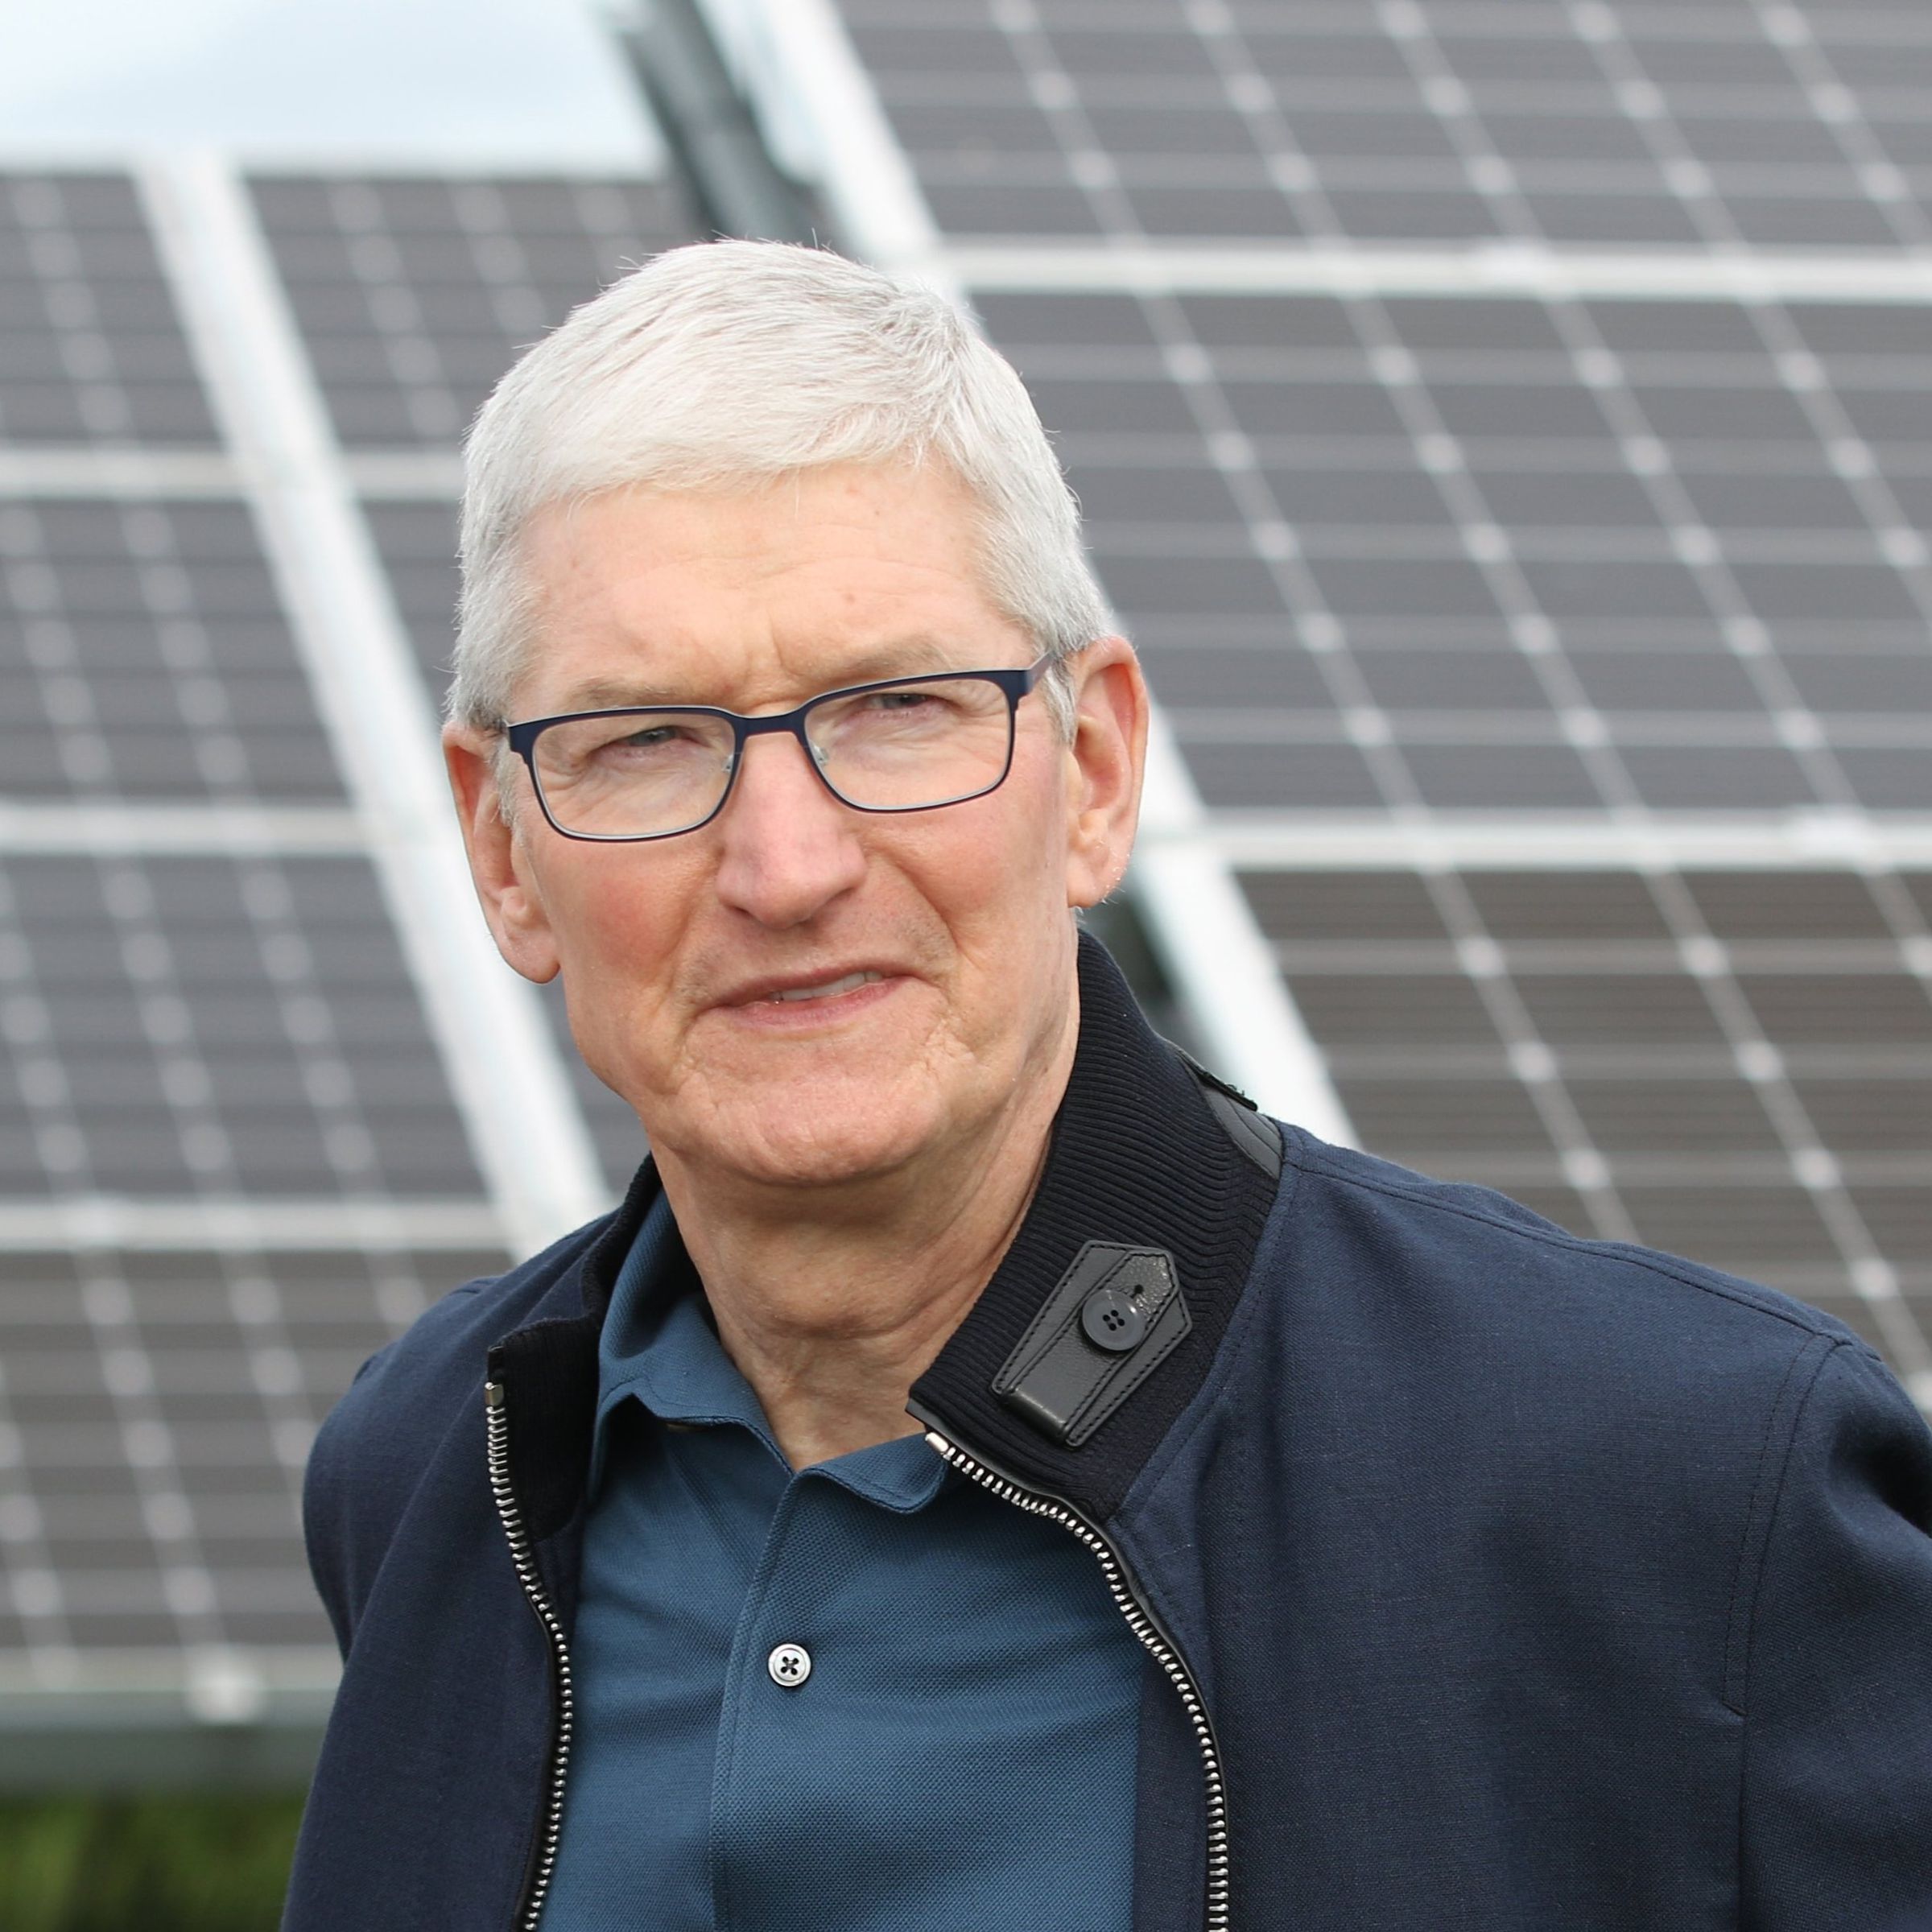 Tim Cook stand in front of large solar panels.